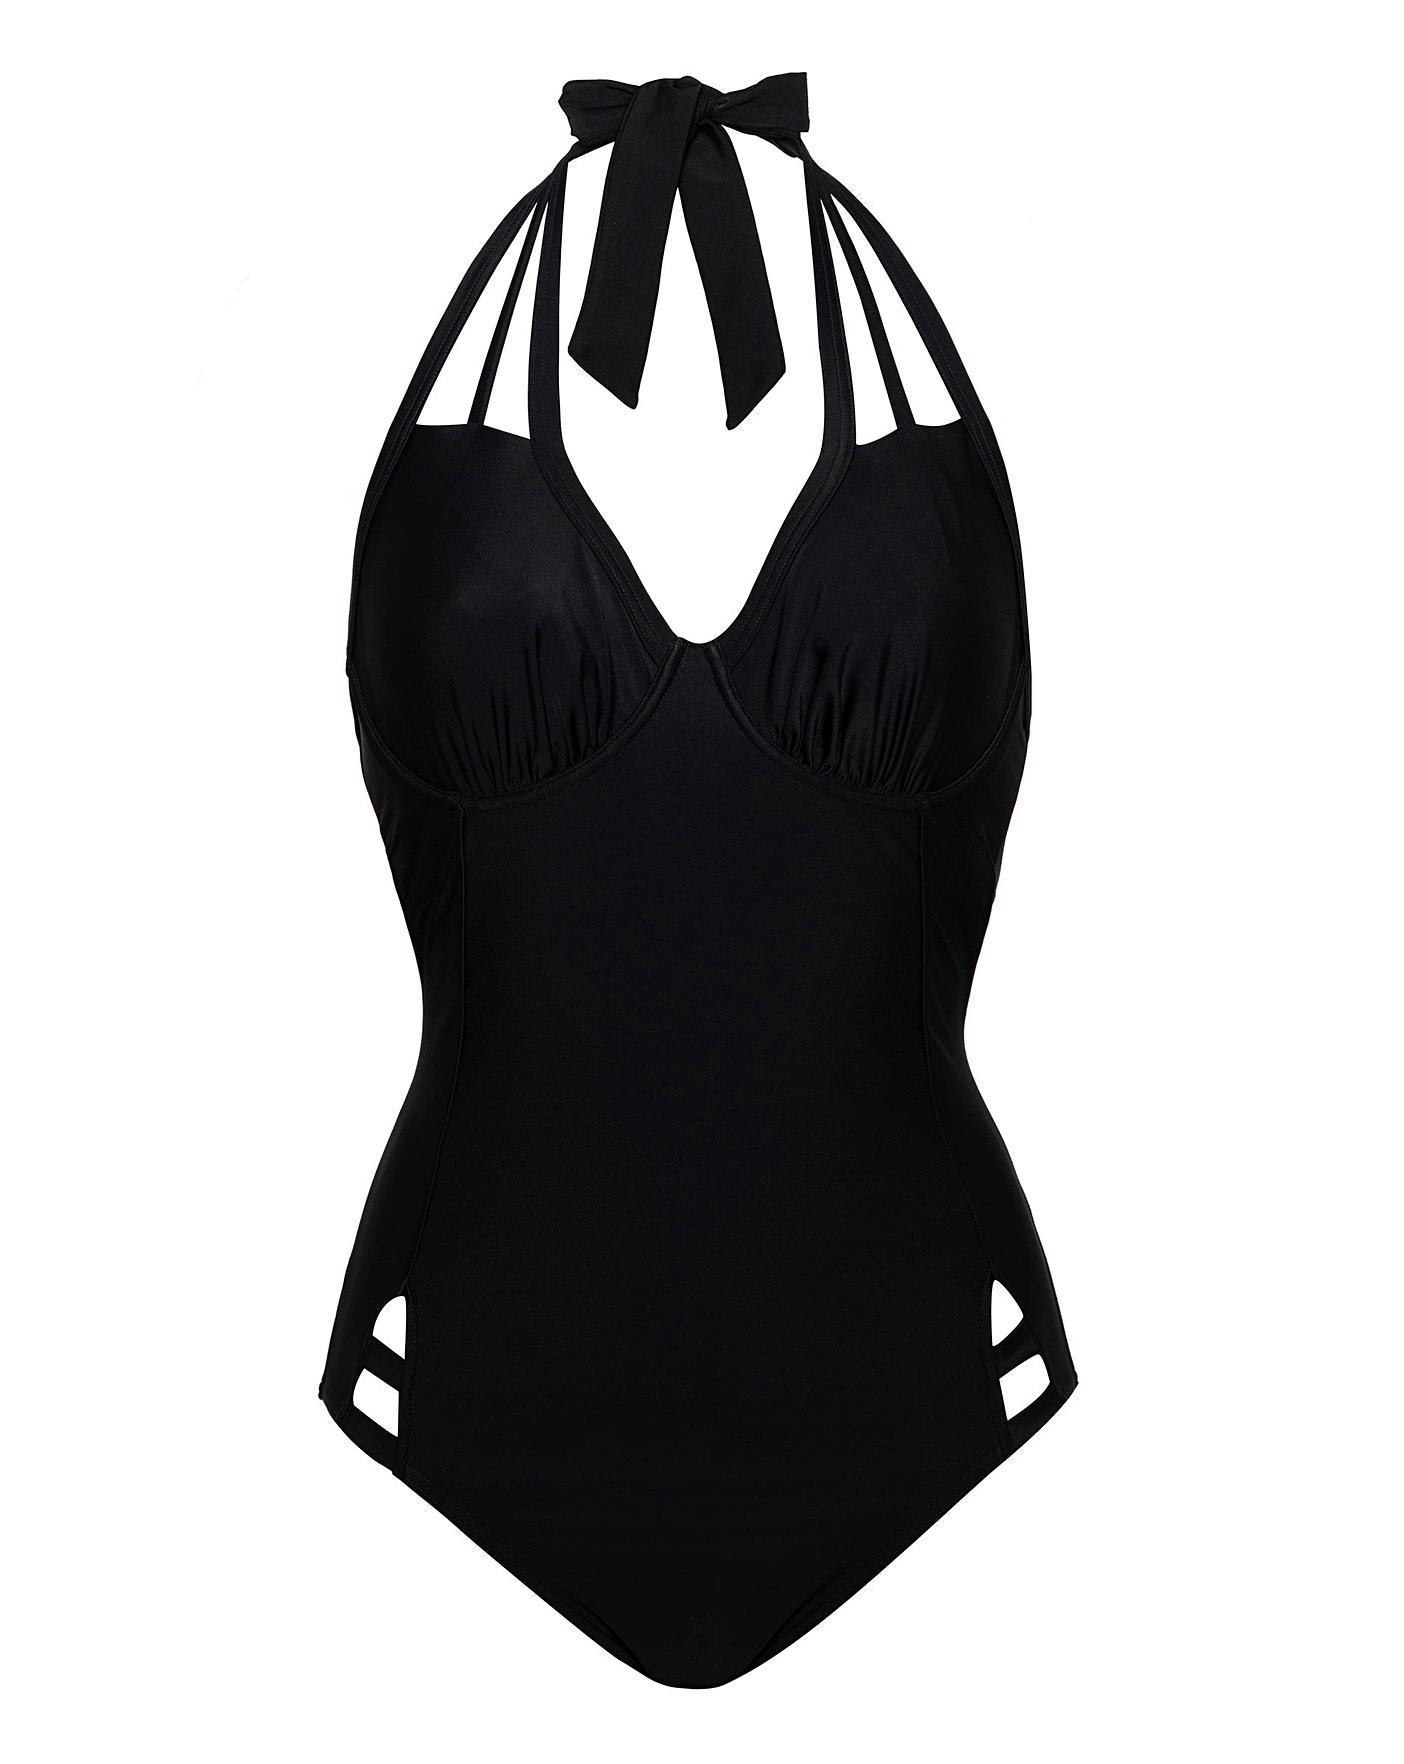 Figleaves womens one piece swimsuit. Neck and halter style